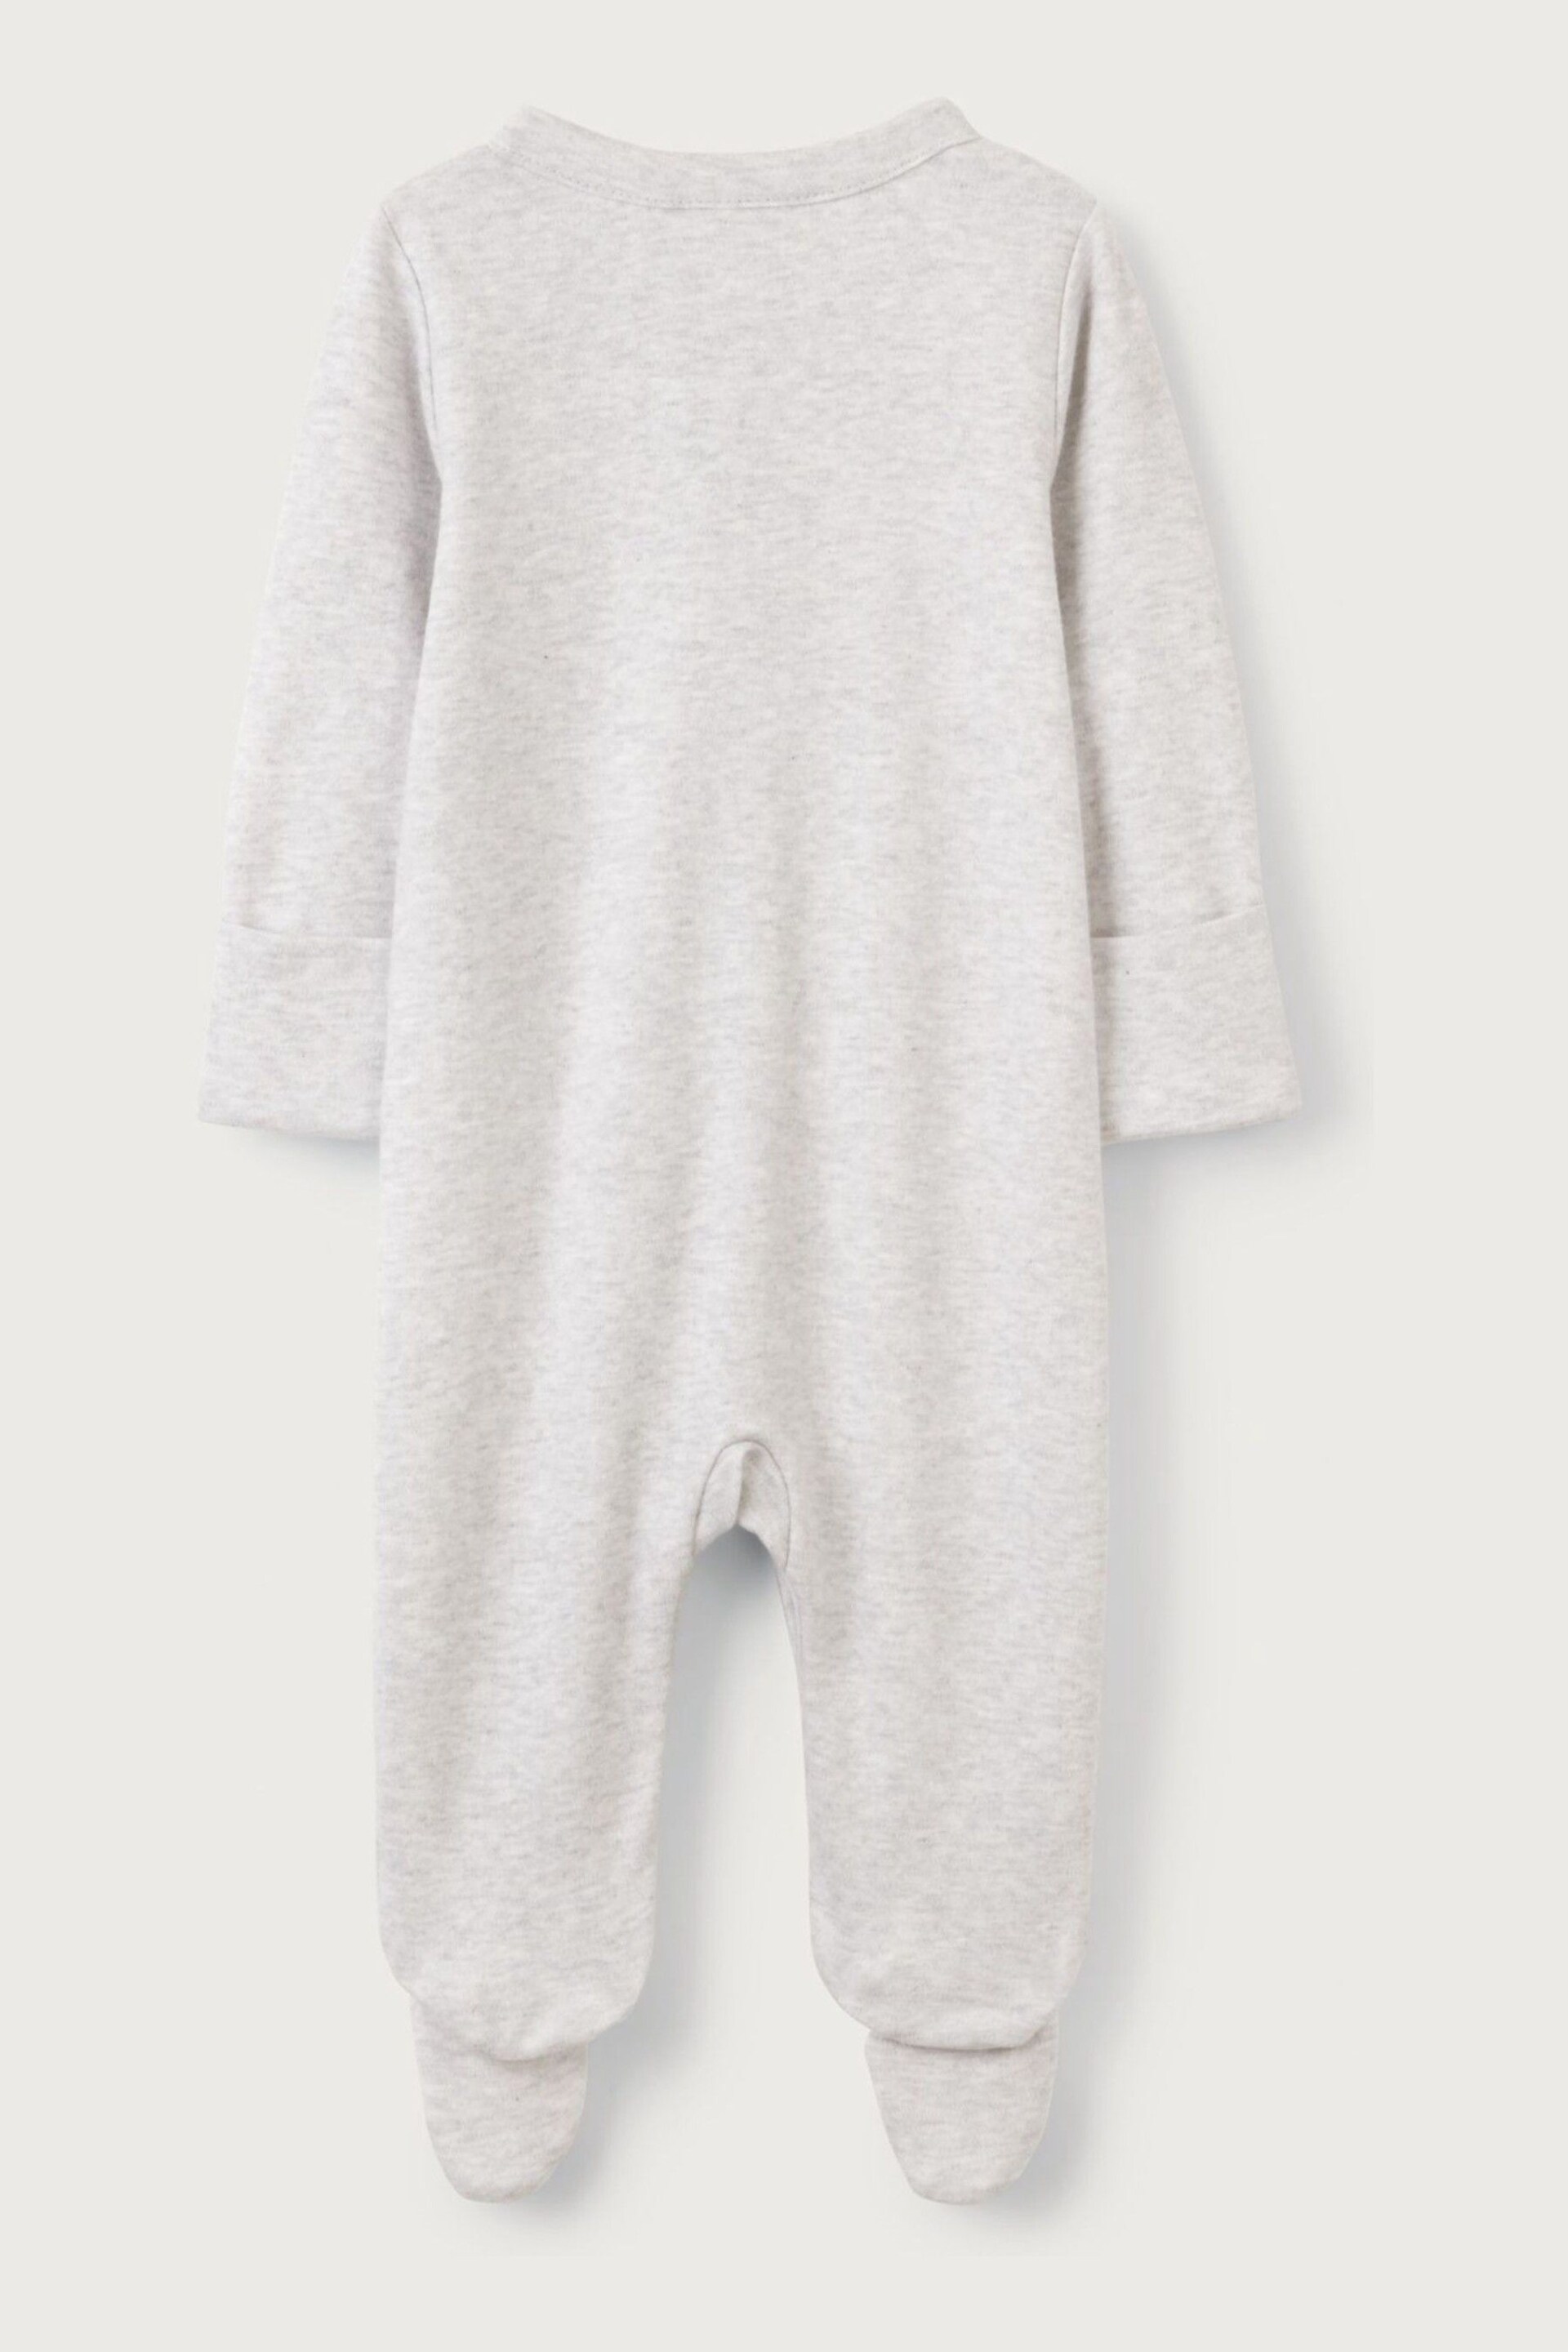 The White Company Grey Cotton Cheetah Knee Popper Down Sleepsuit - Image 4 of 4